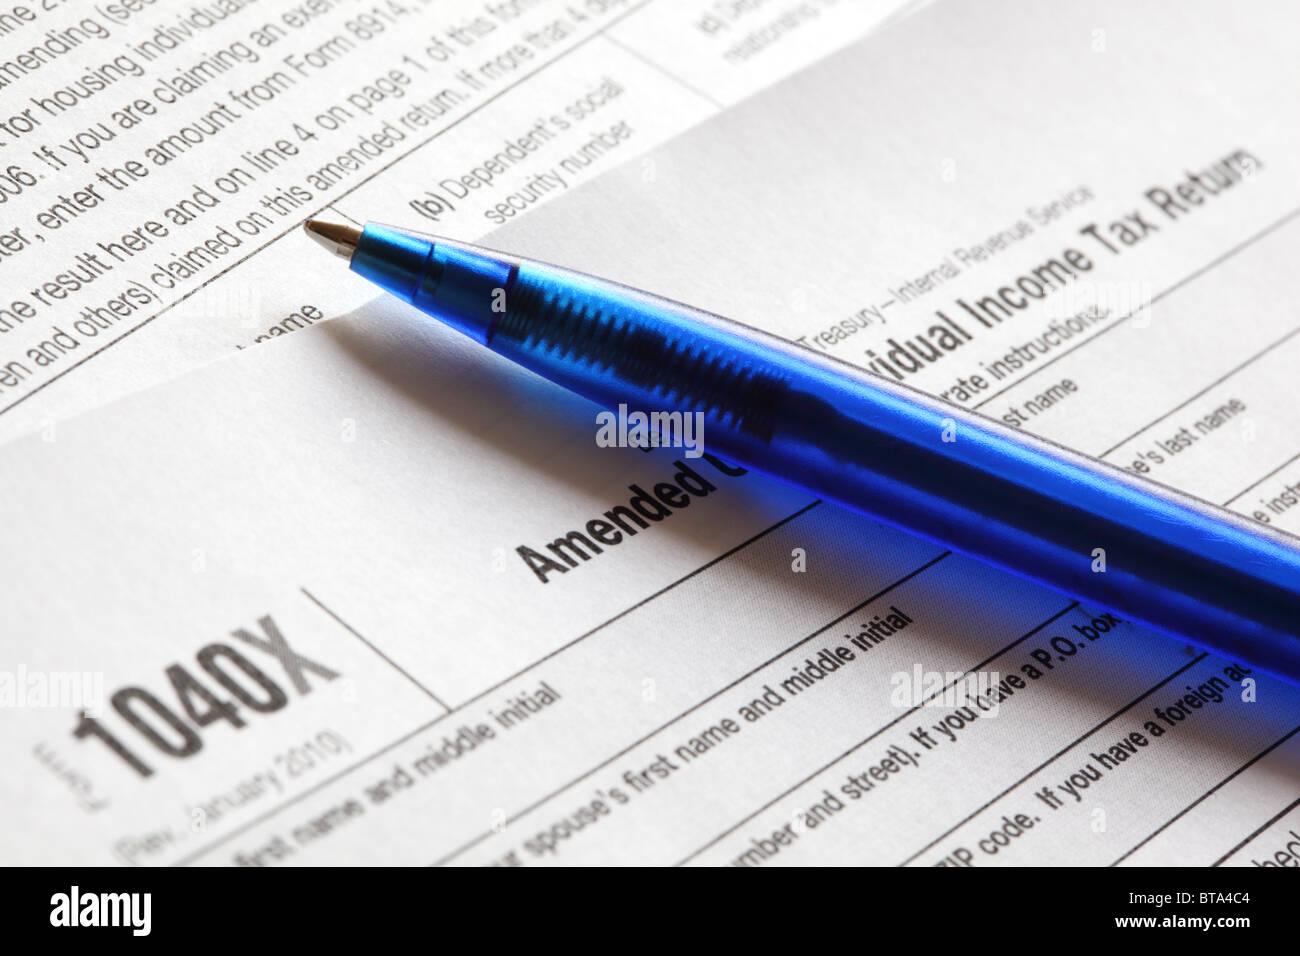 U.S. income tax form 1040X and a blue pen close-up. Shallow DOF. Stock Photo